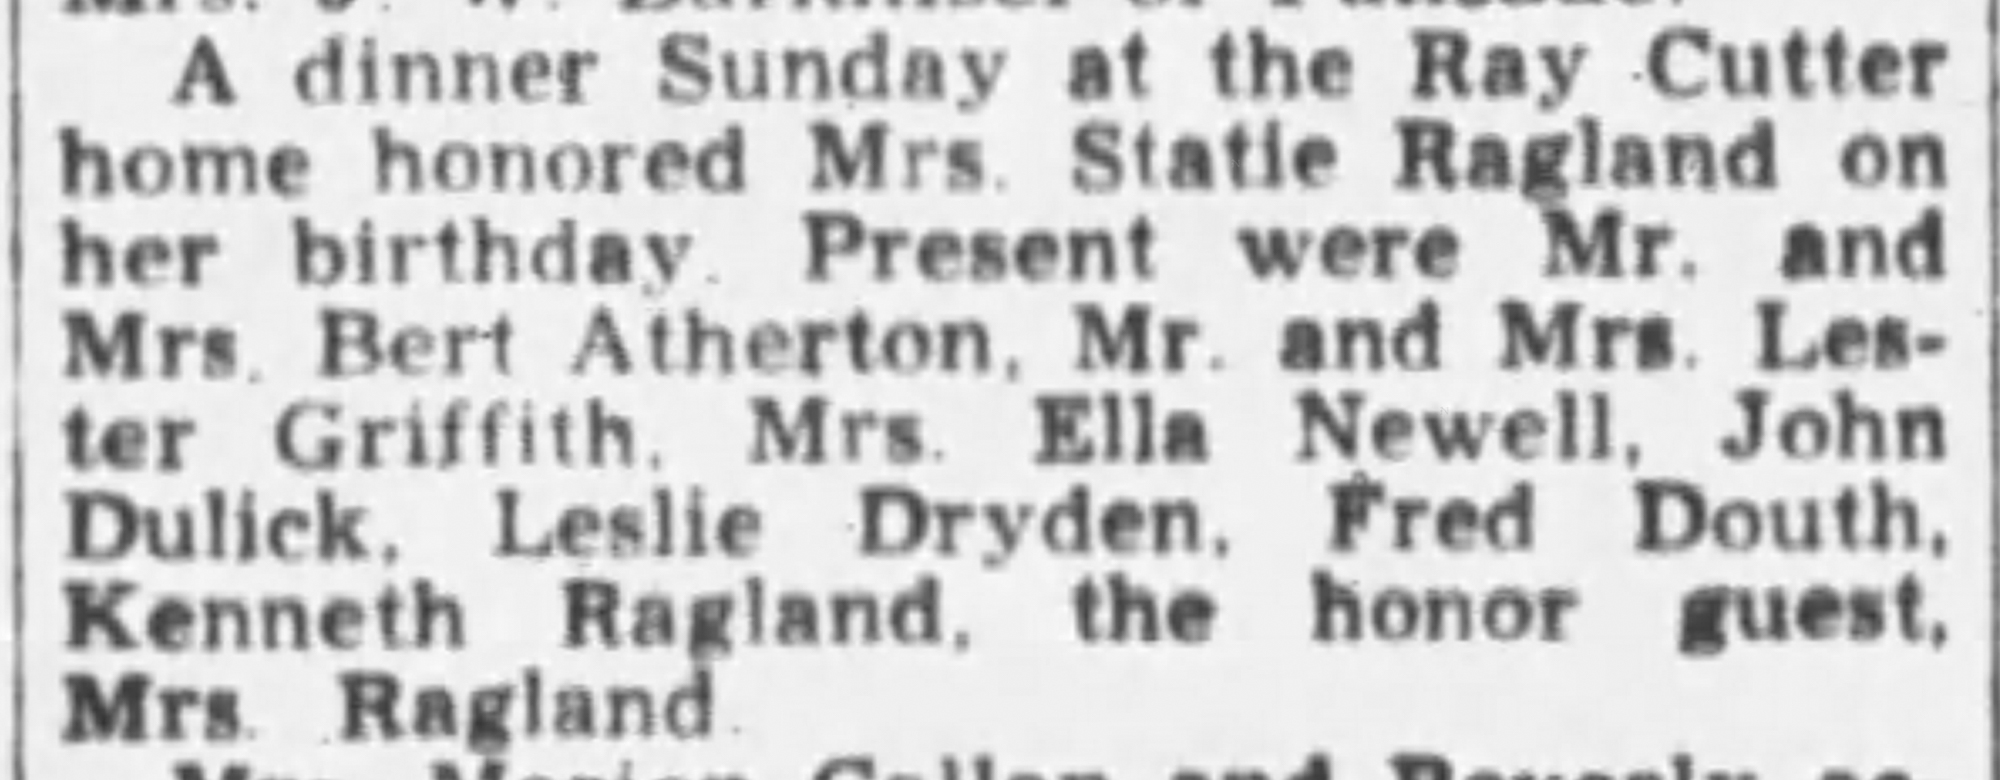 Dauth Family Archive - 1948-03-26 - The Daily Sentinel - Fred Dauth At Ray Cutter Home